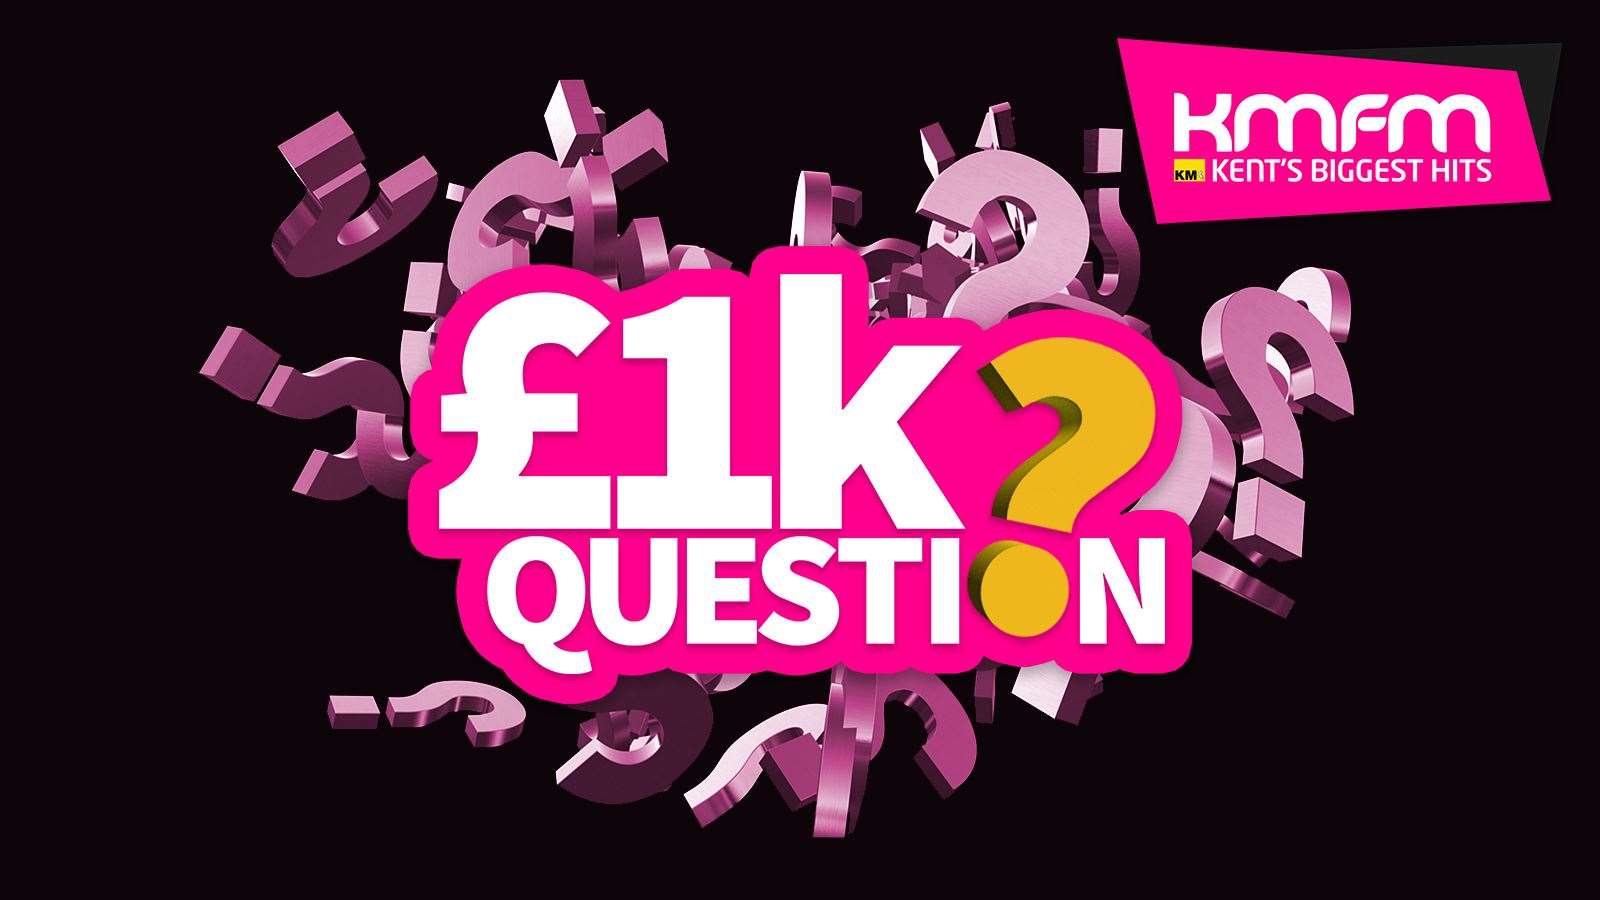 Listen to kmfm for a chance to win next month's £1k question